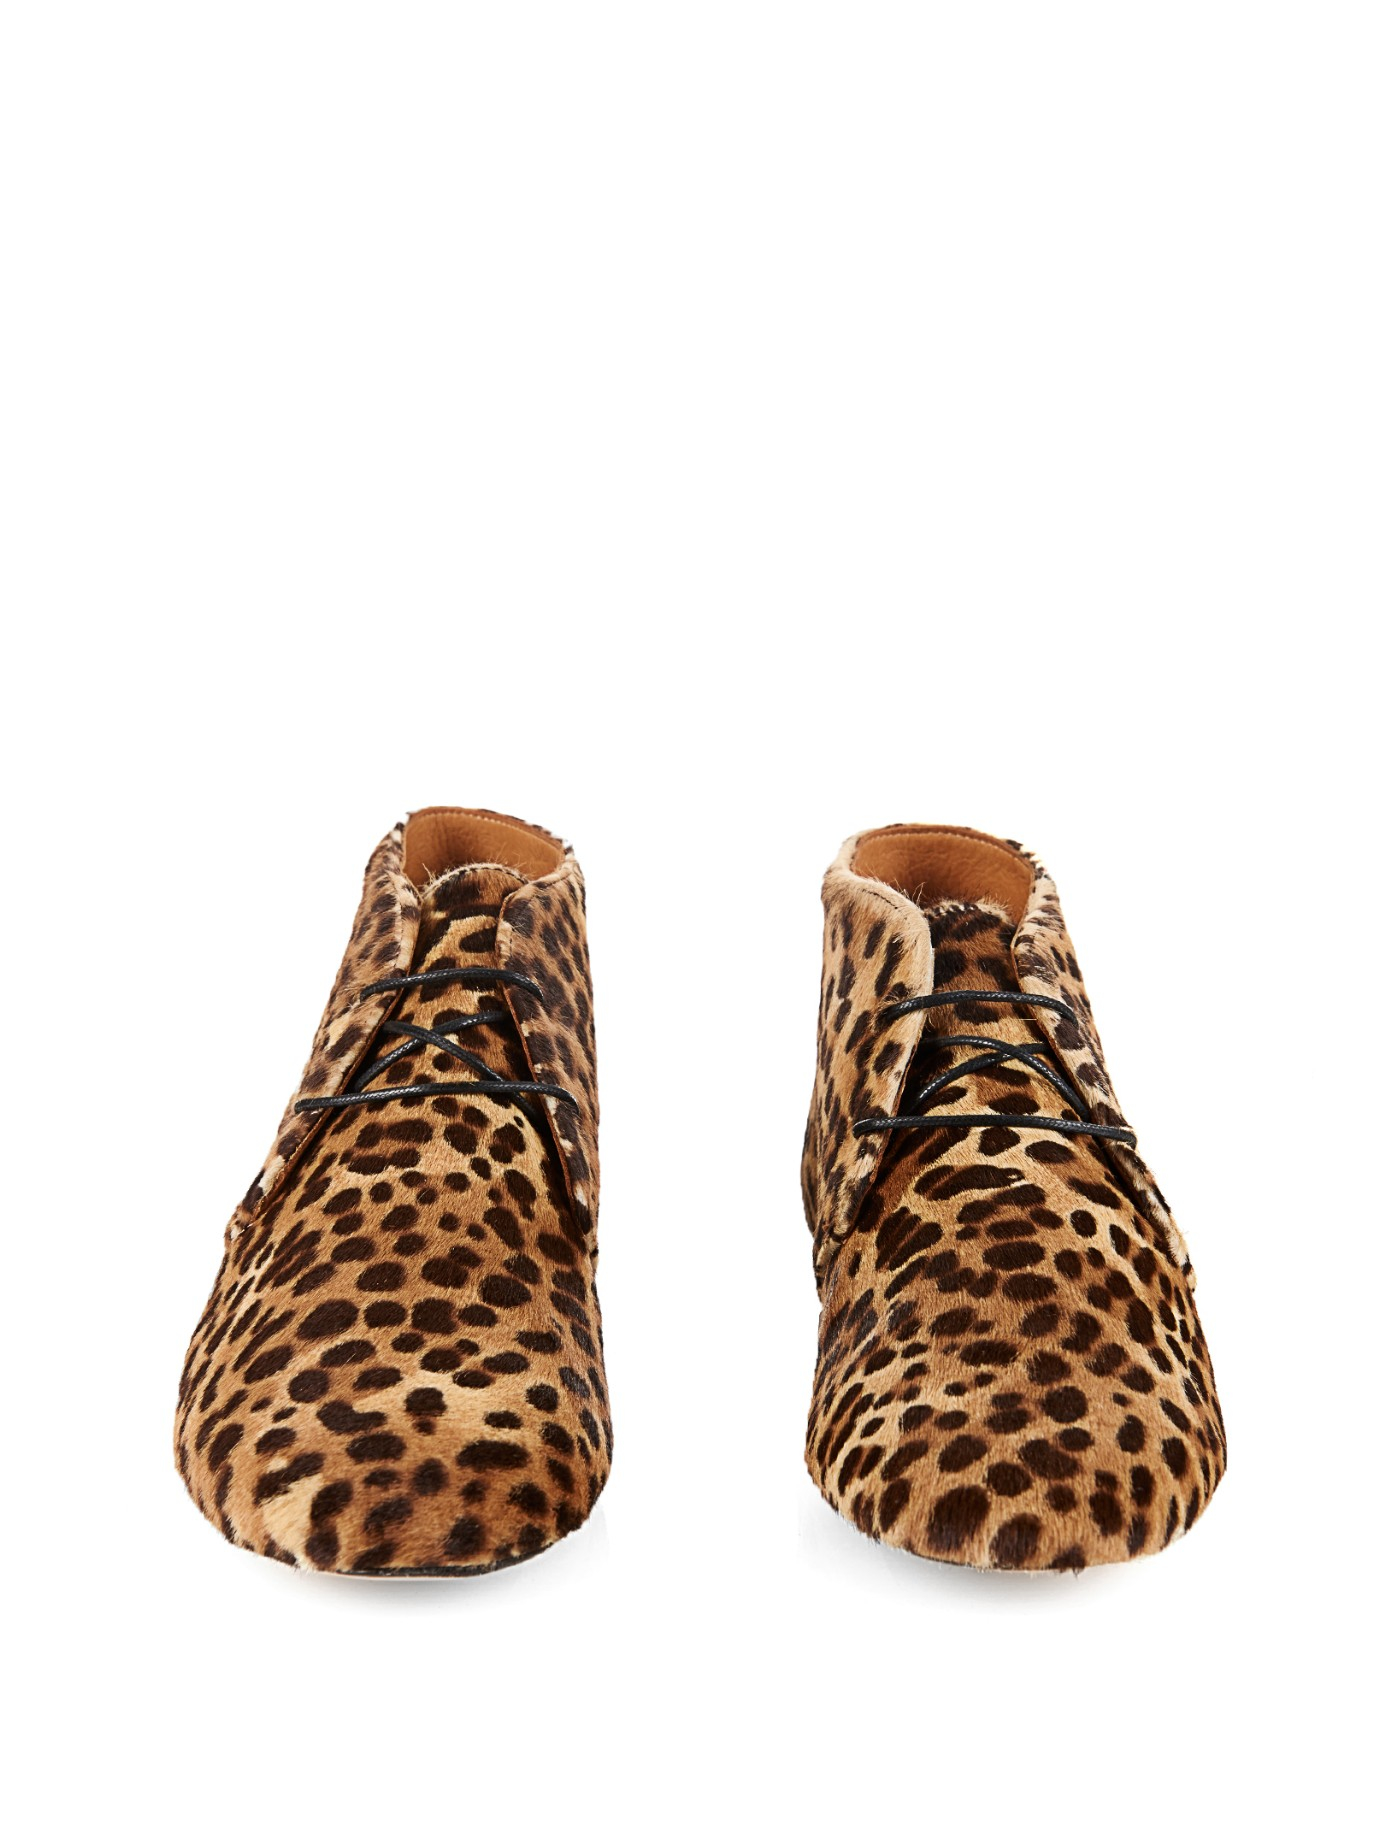 Isabel Marant Leather Ginger Leopard-Print Calf-Hair Boots - Lyst